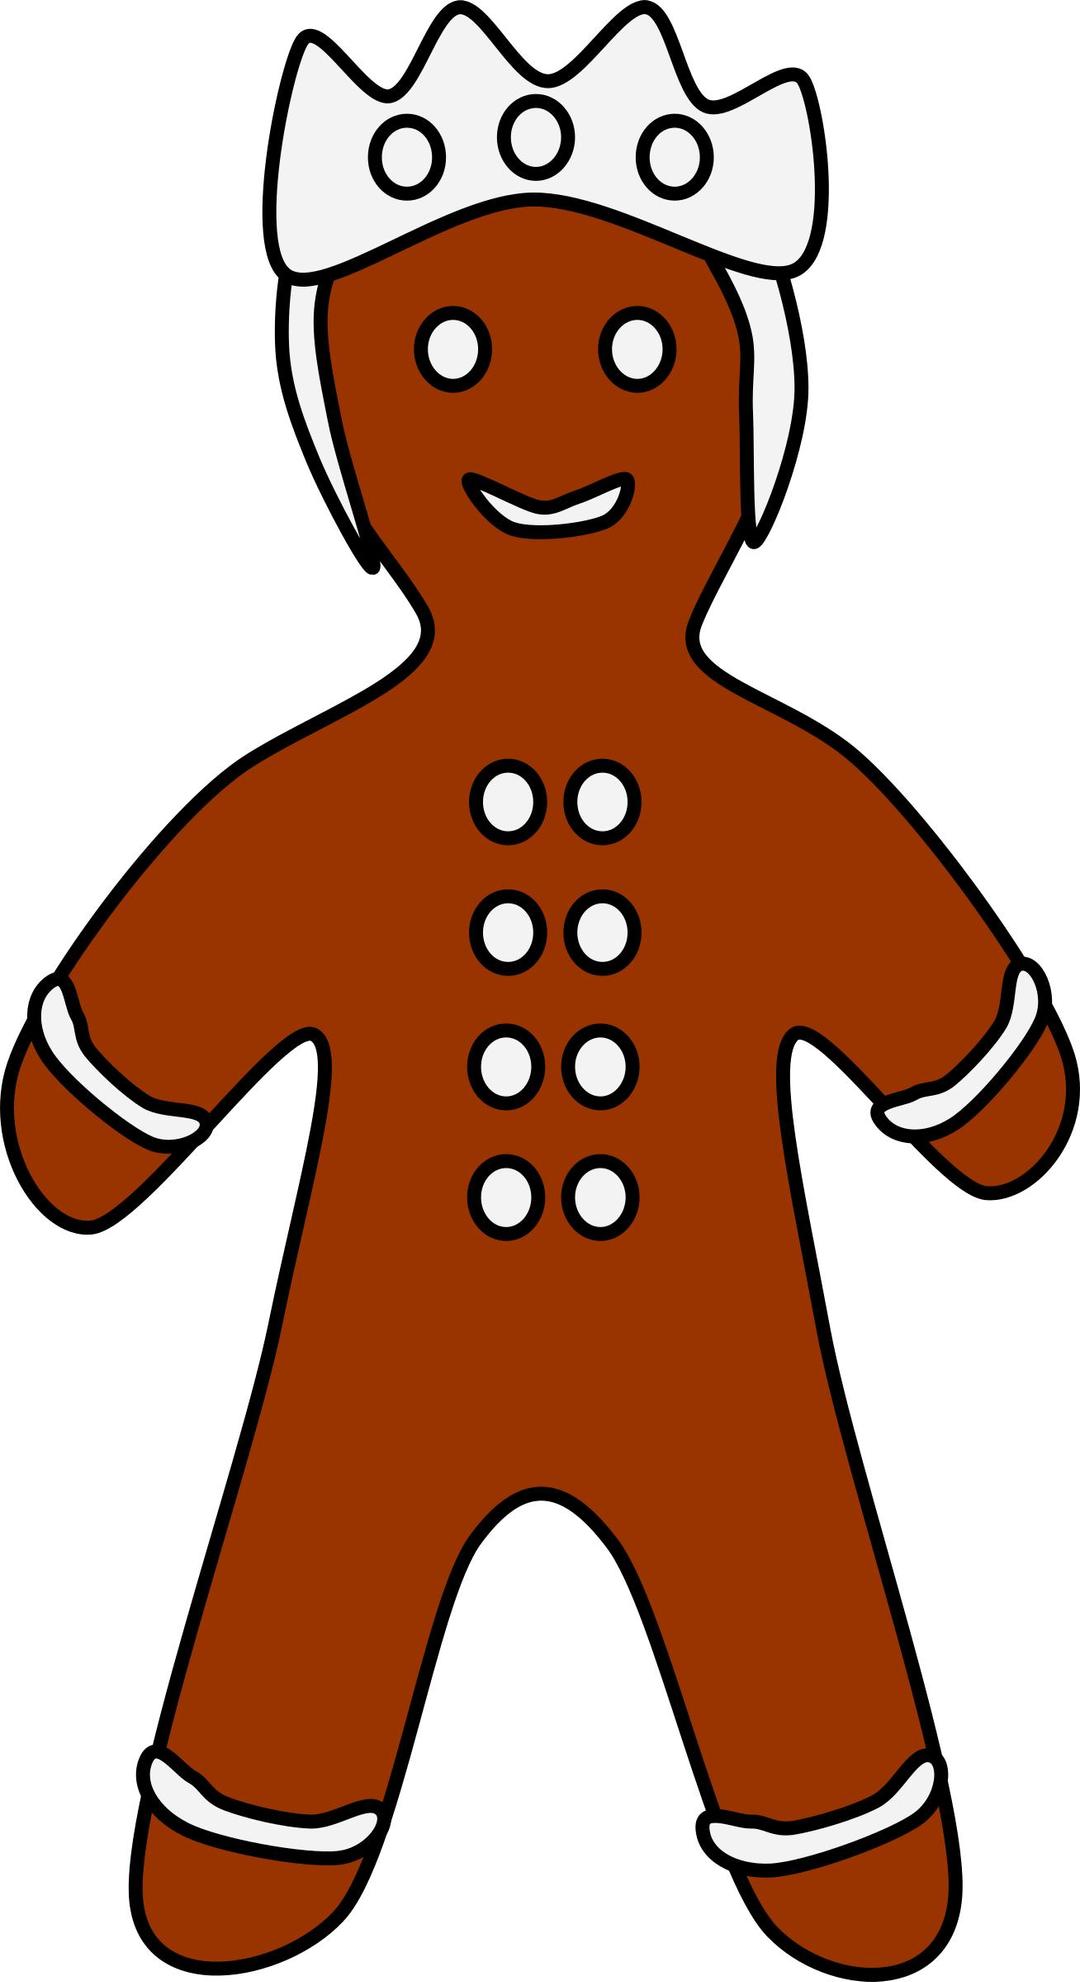 Gingerbread king (many buttons) png transparent